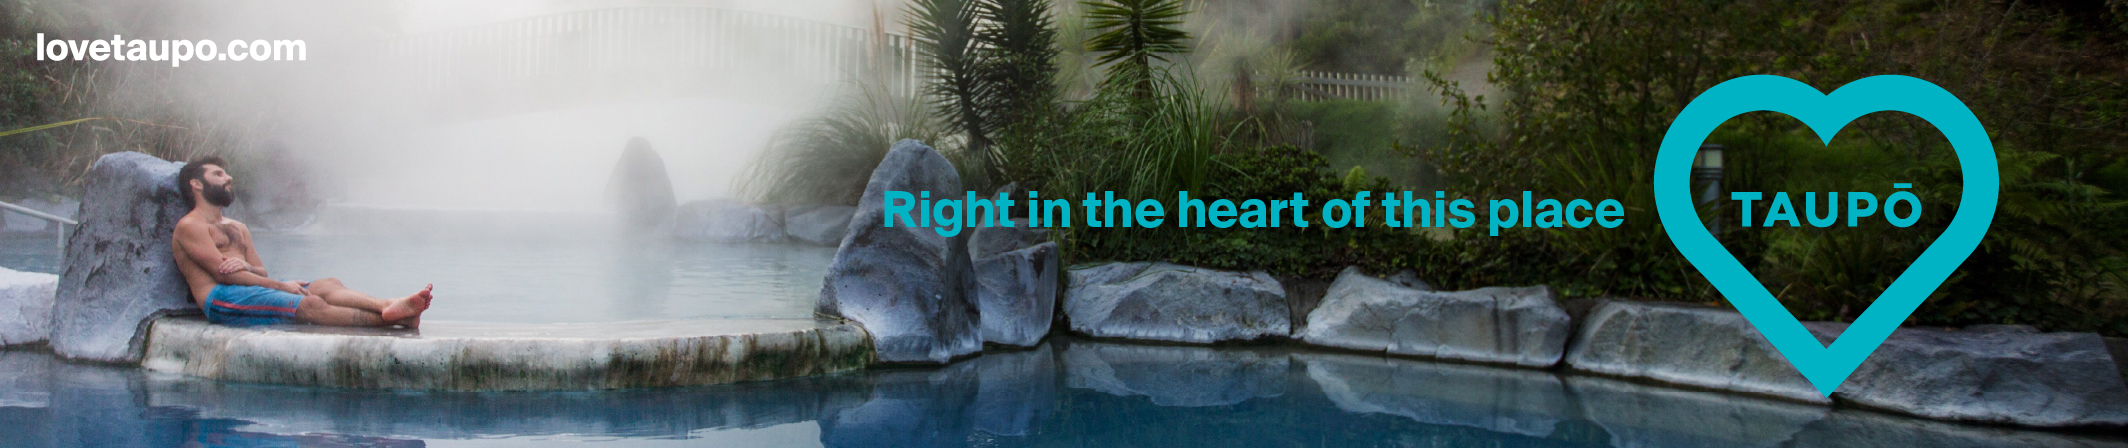 Love Taupo - Right in the heart of this place campaign